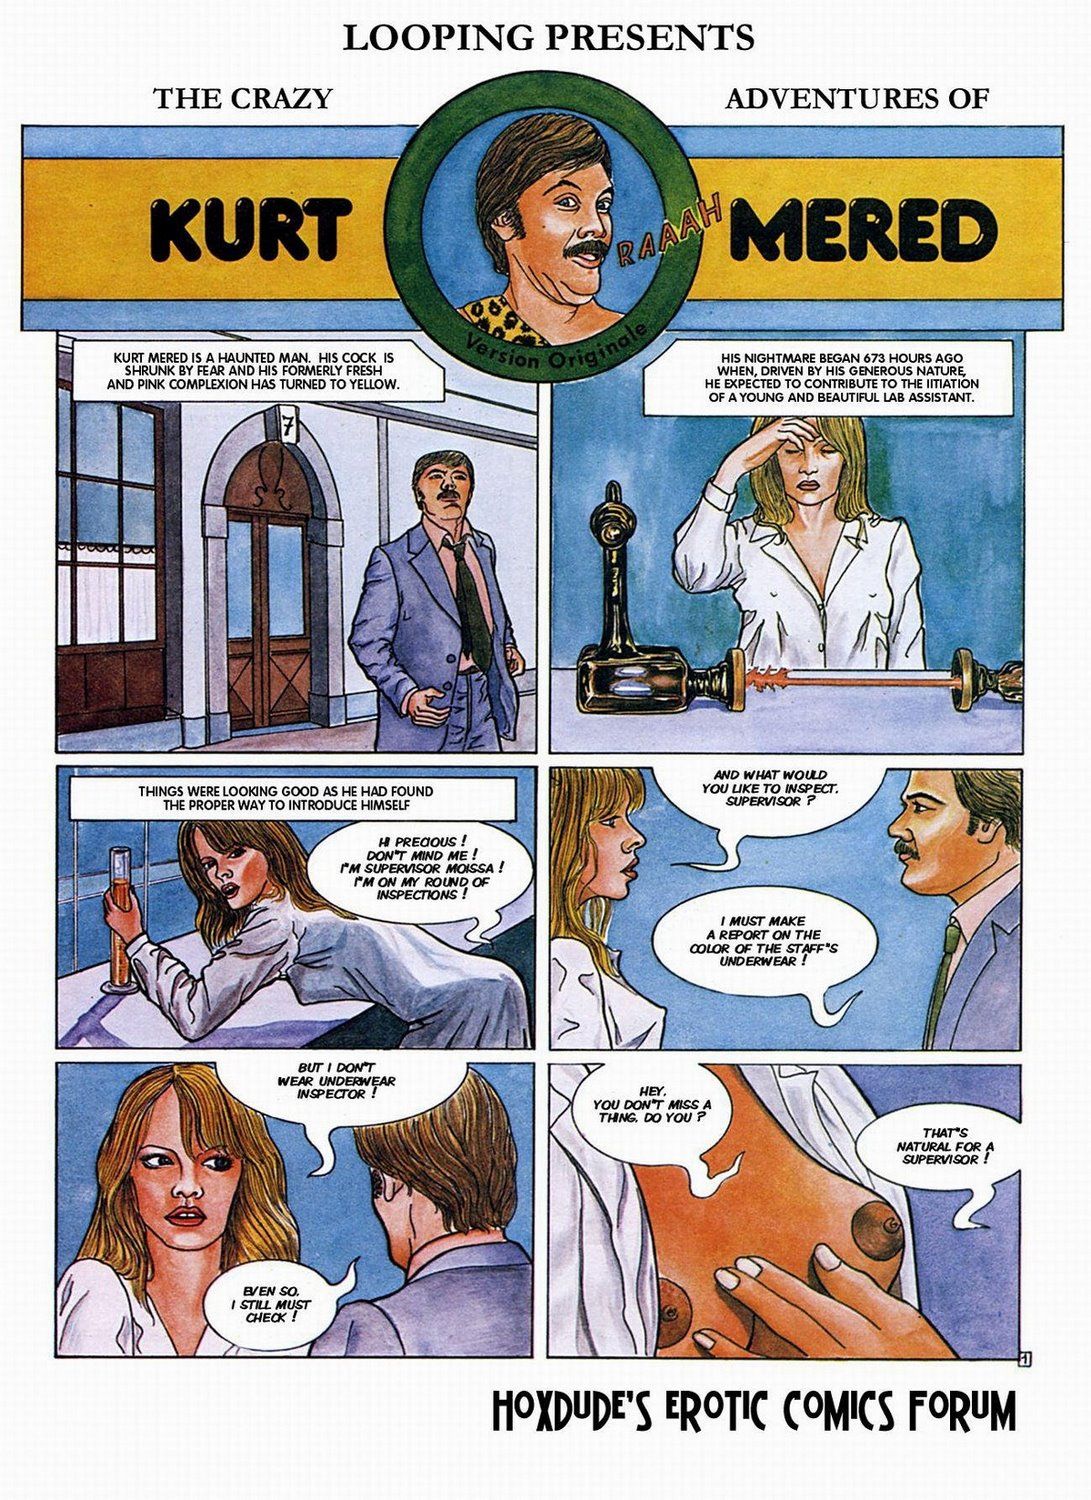 The Crazy Adventures of Kurt Mered (Looping) page 3